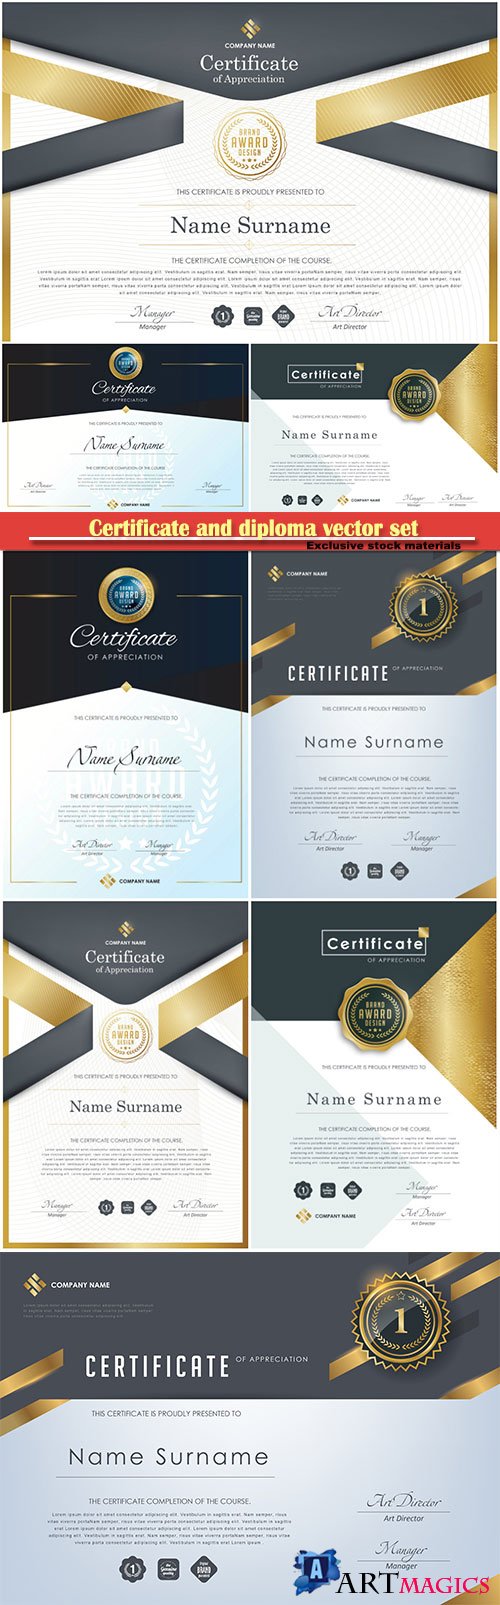 Certificate and diploma vector set # 5